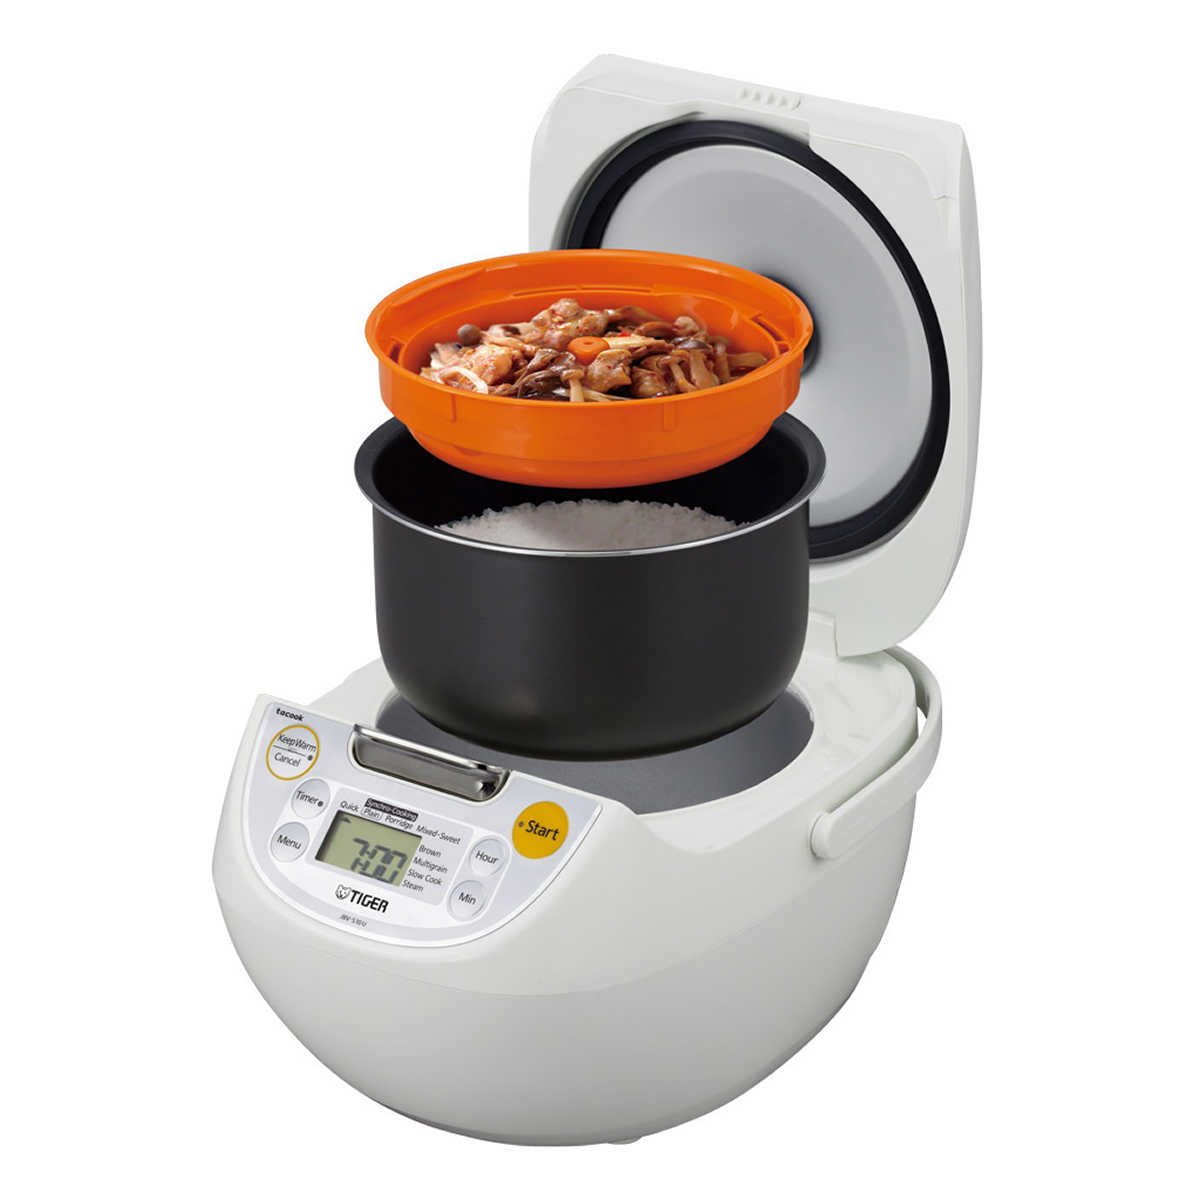 Tiger Micom 5.5-cup Rice Cooker and Warmer